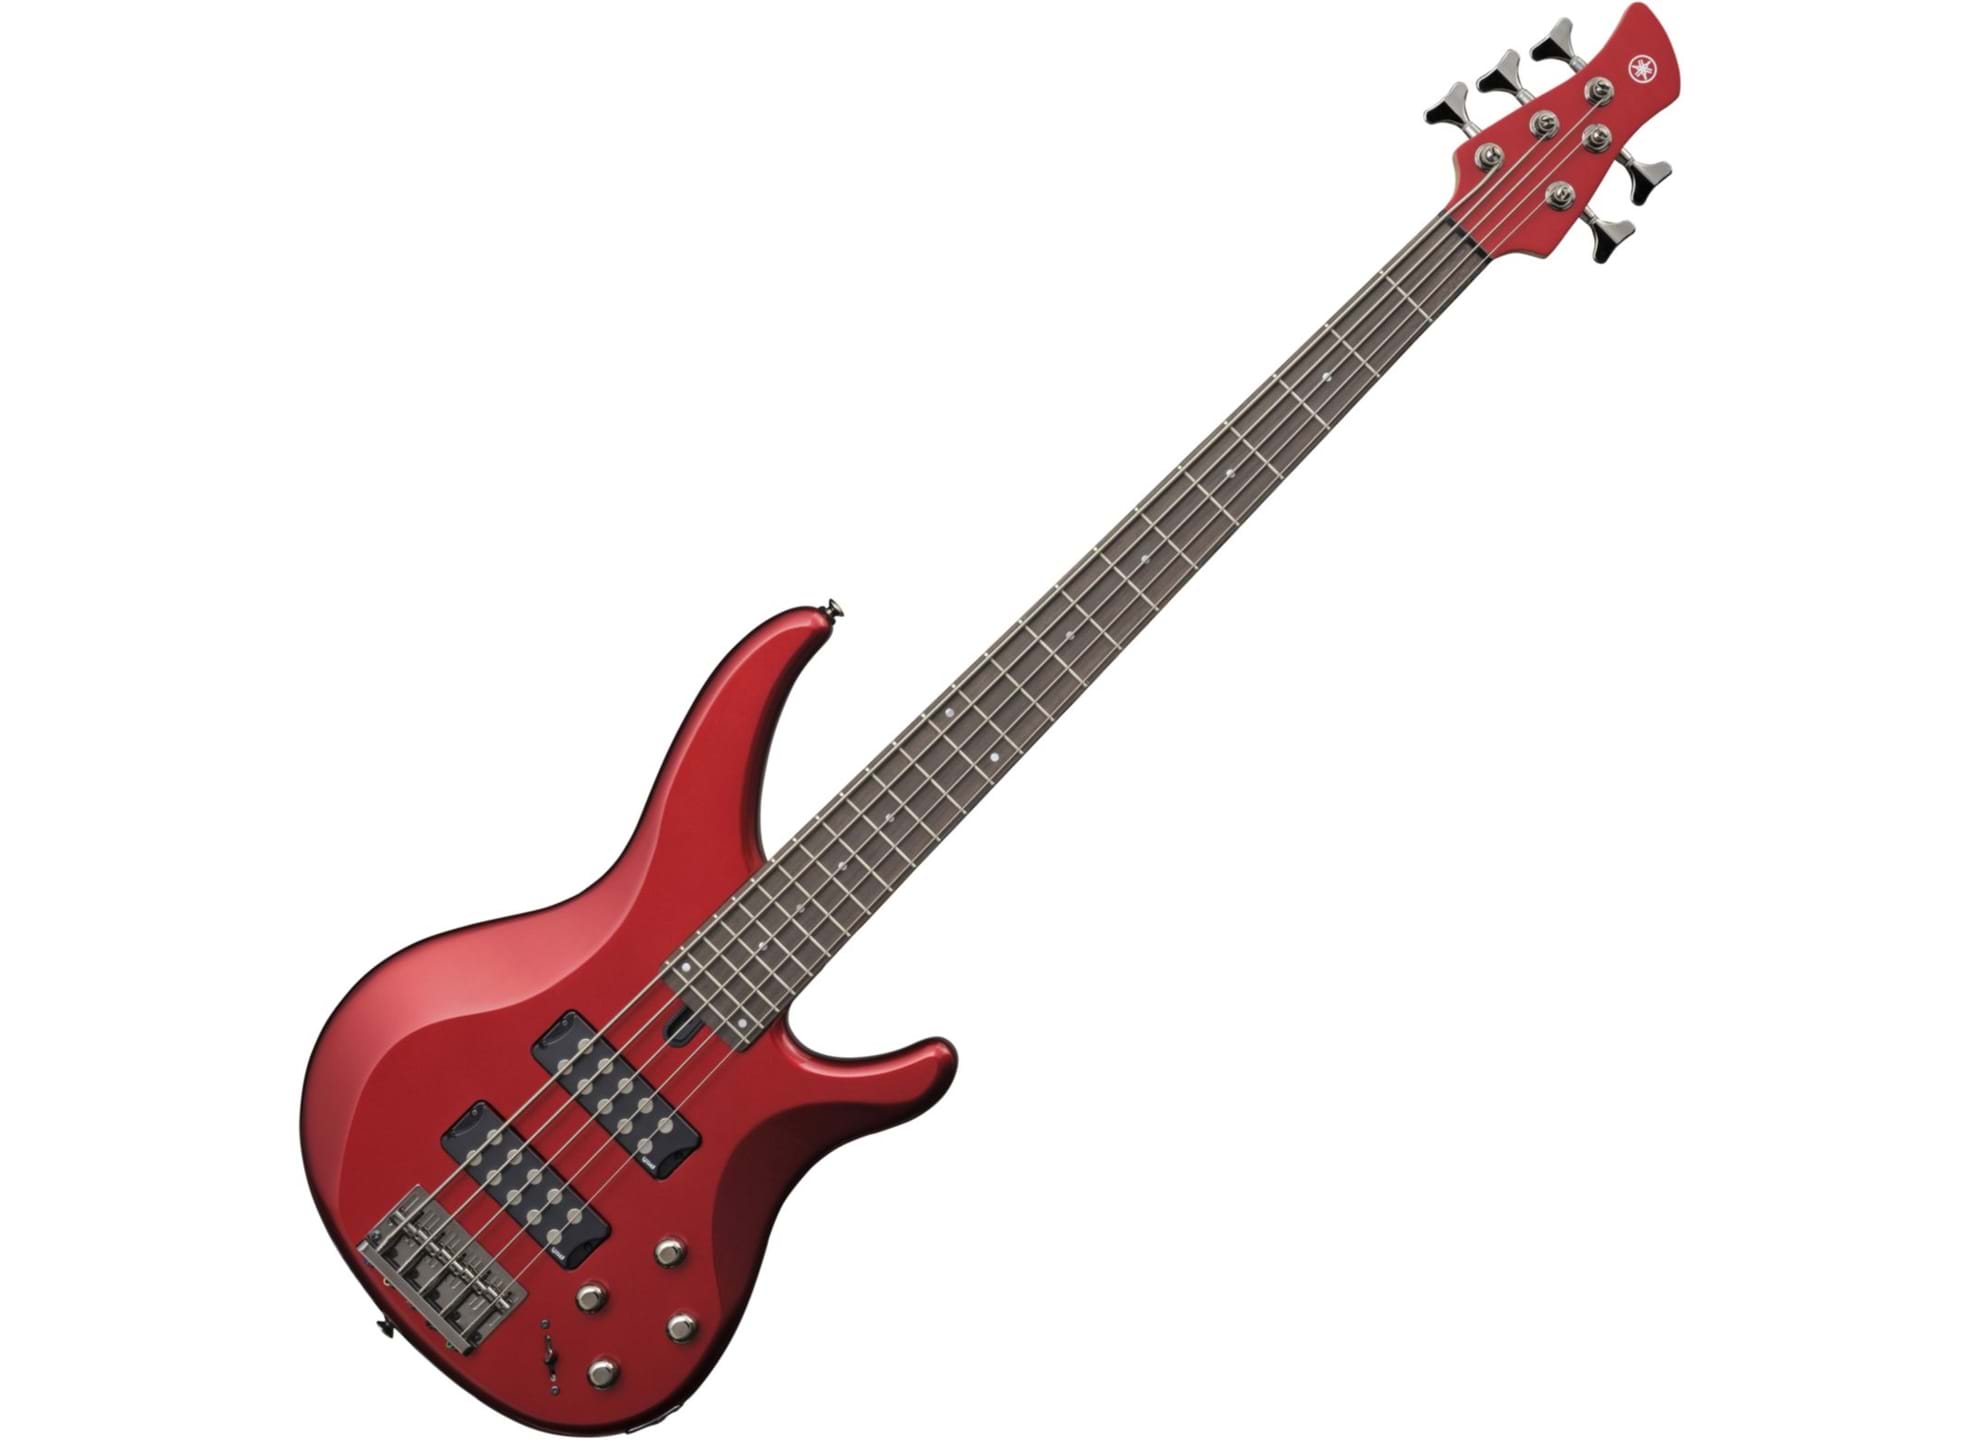 TRBX305 Candy Apple Red